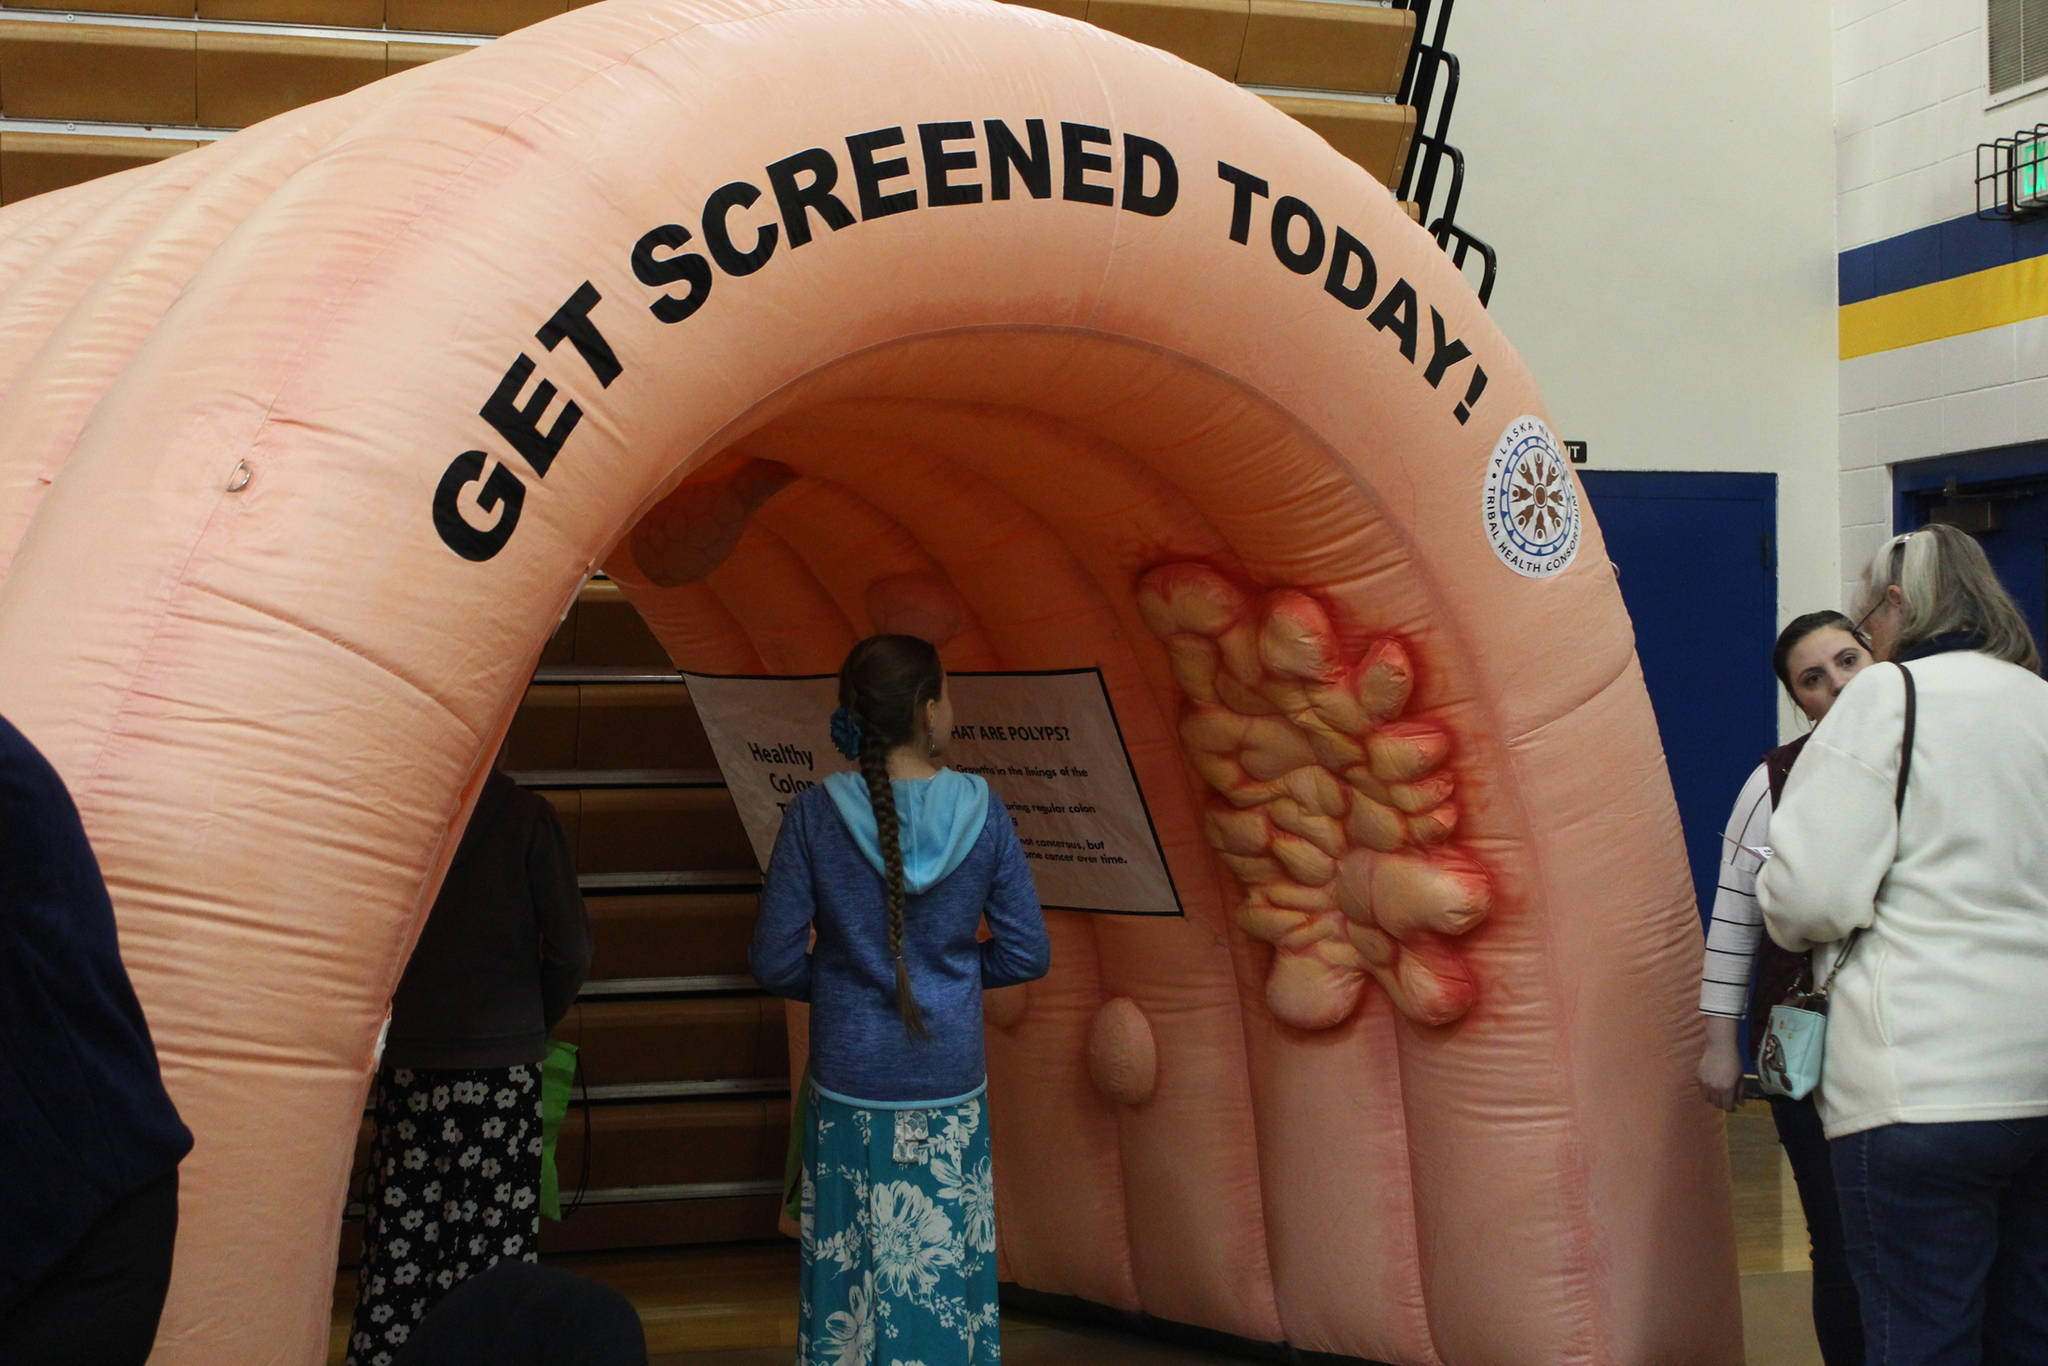 Fairgoers investigate “Nolan the Colon,” an inflatable tunnel used to teach colon health, at this year’s Rotary Health Fair on Saturday, Nov. 3, 2018 at Homer High School in Homer, Alaska. (Photo by Megan Pacer/Homer News)